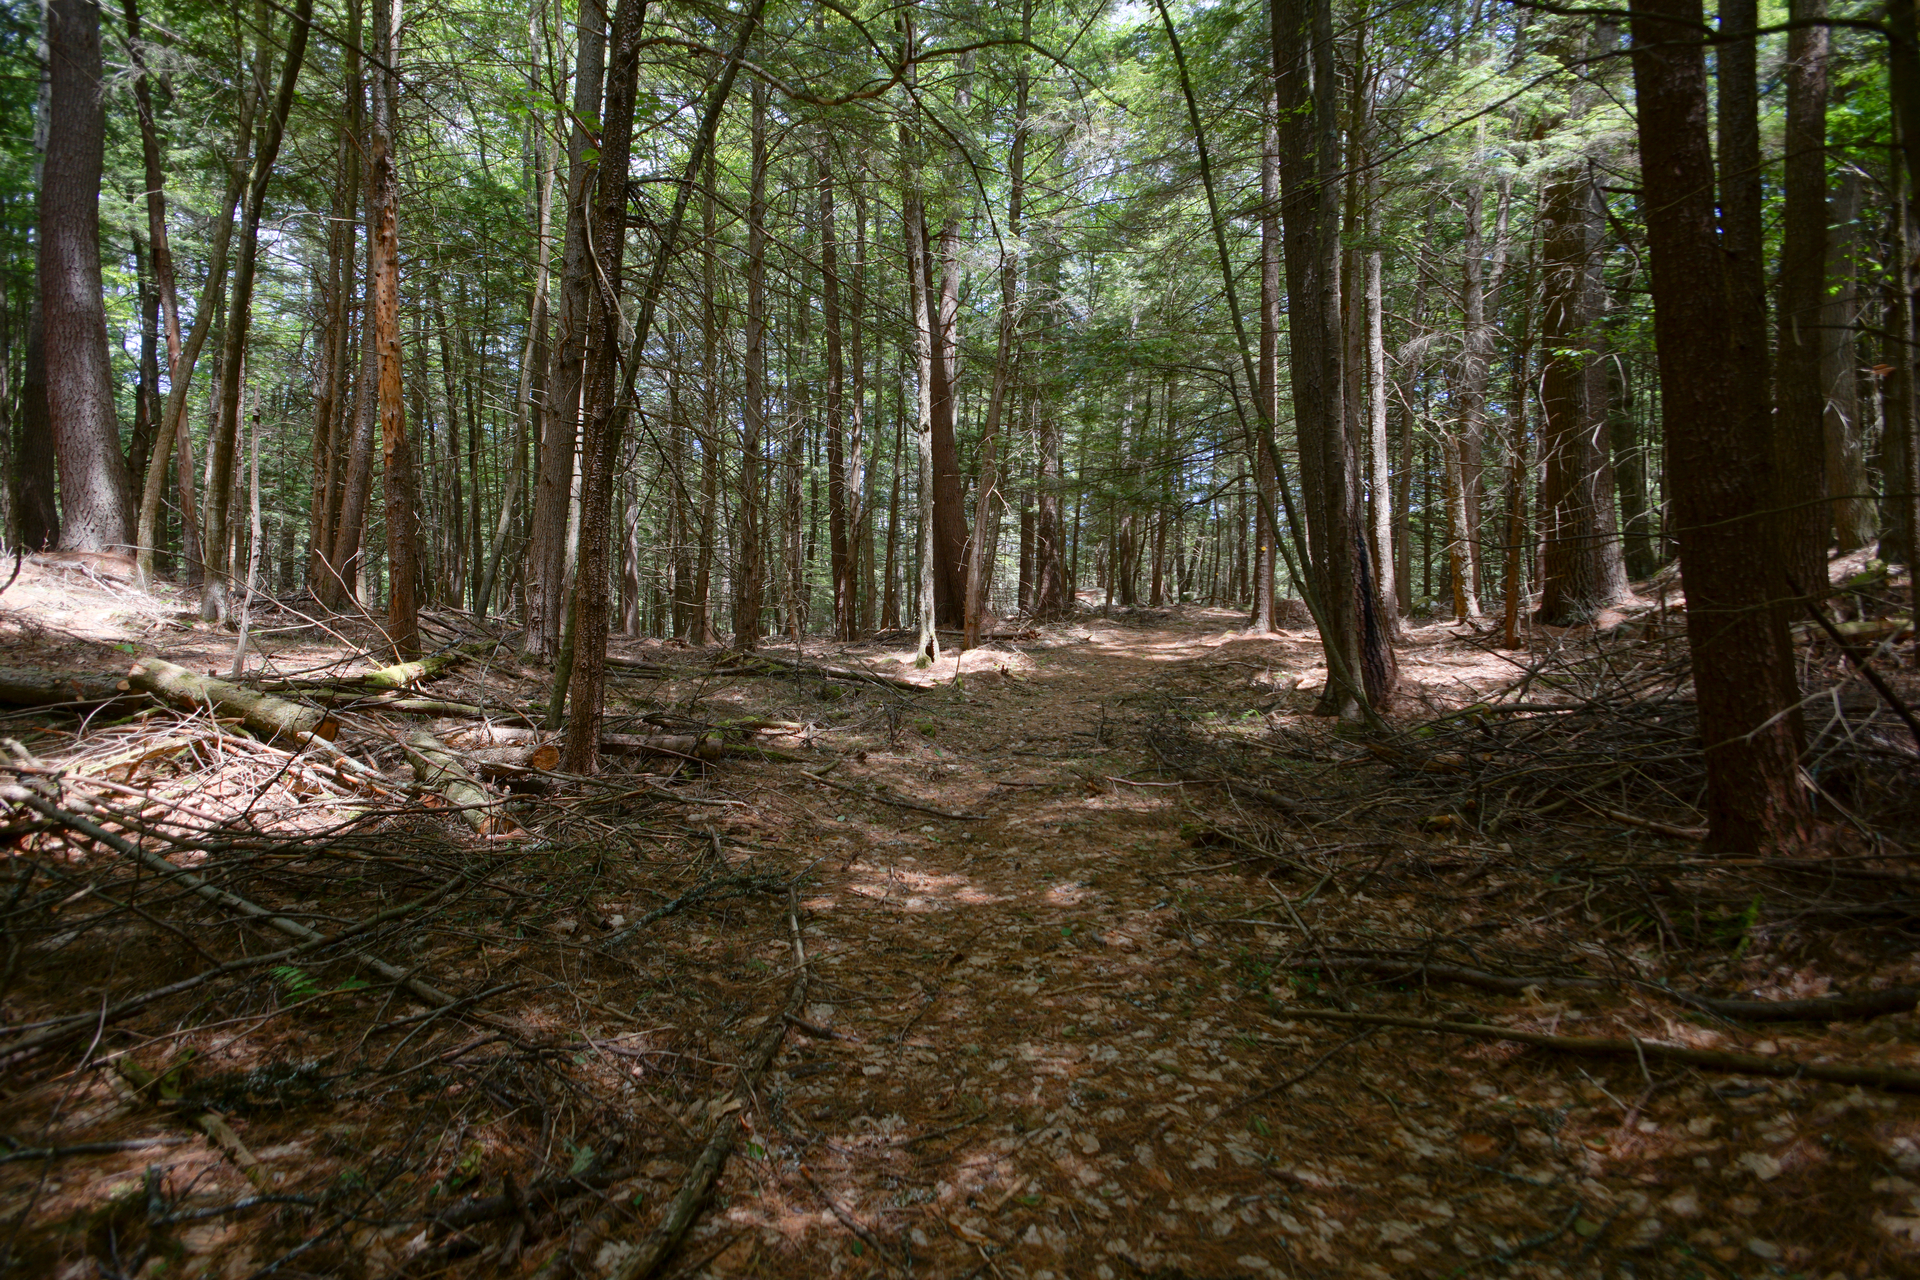 A bare forest floor with tall tree trunks. Green canopy is visible.